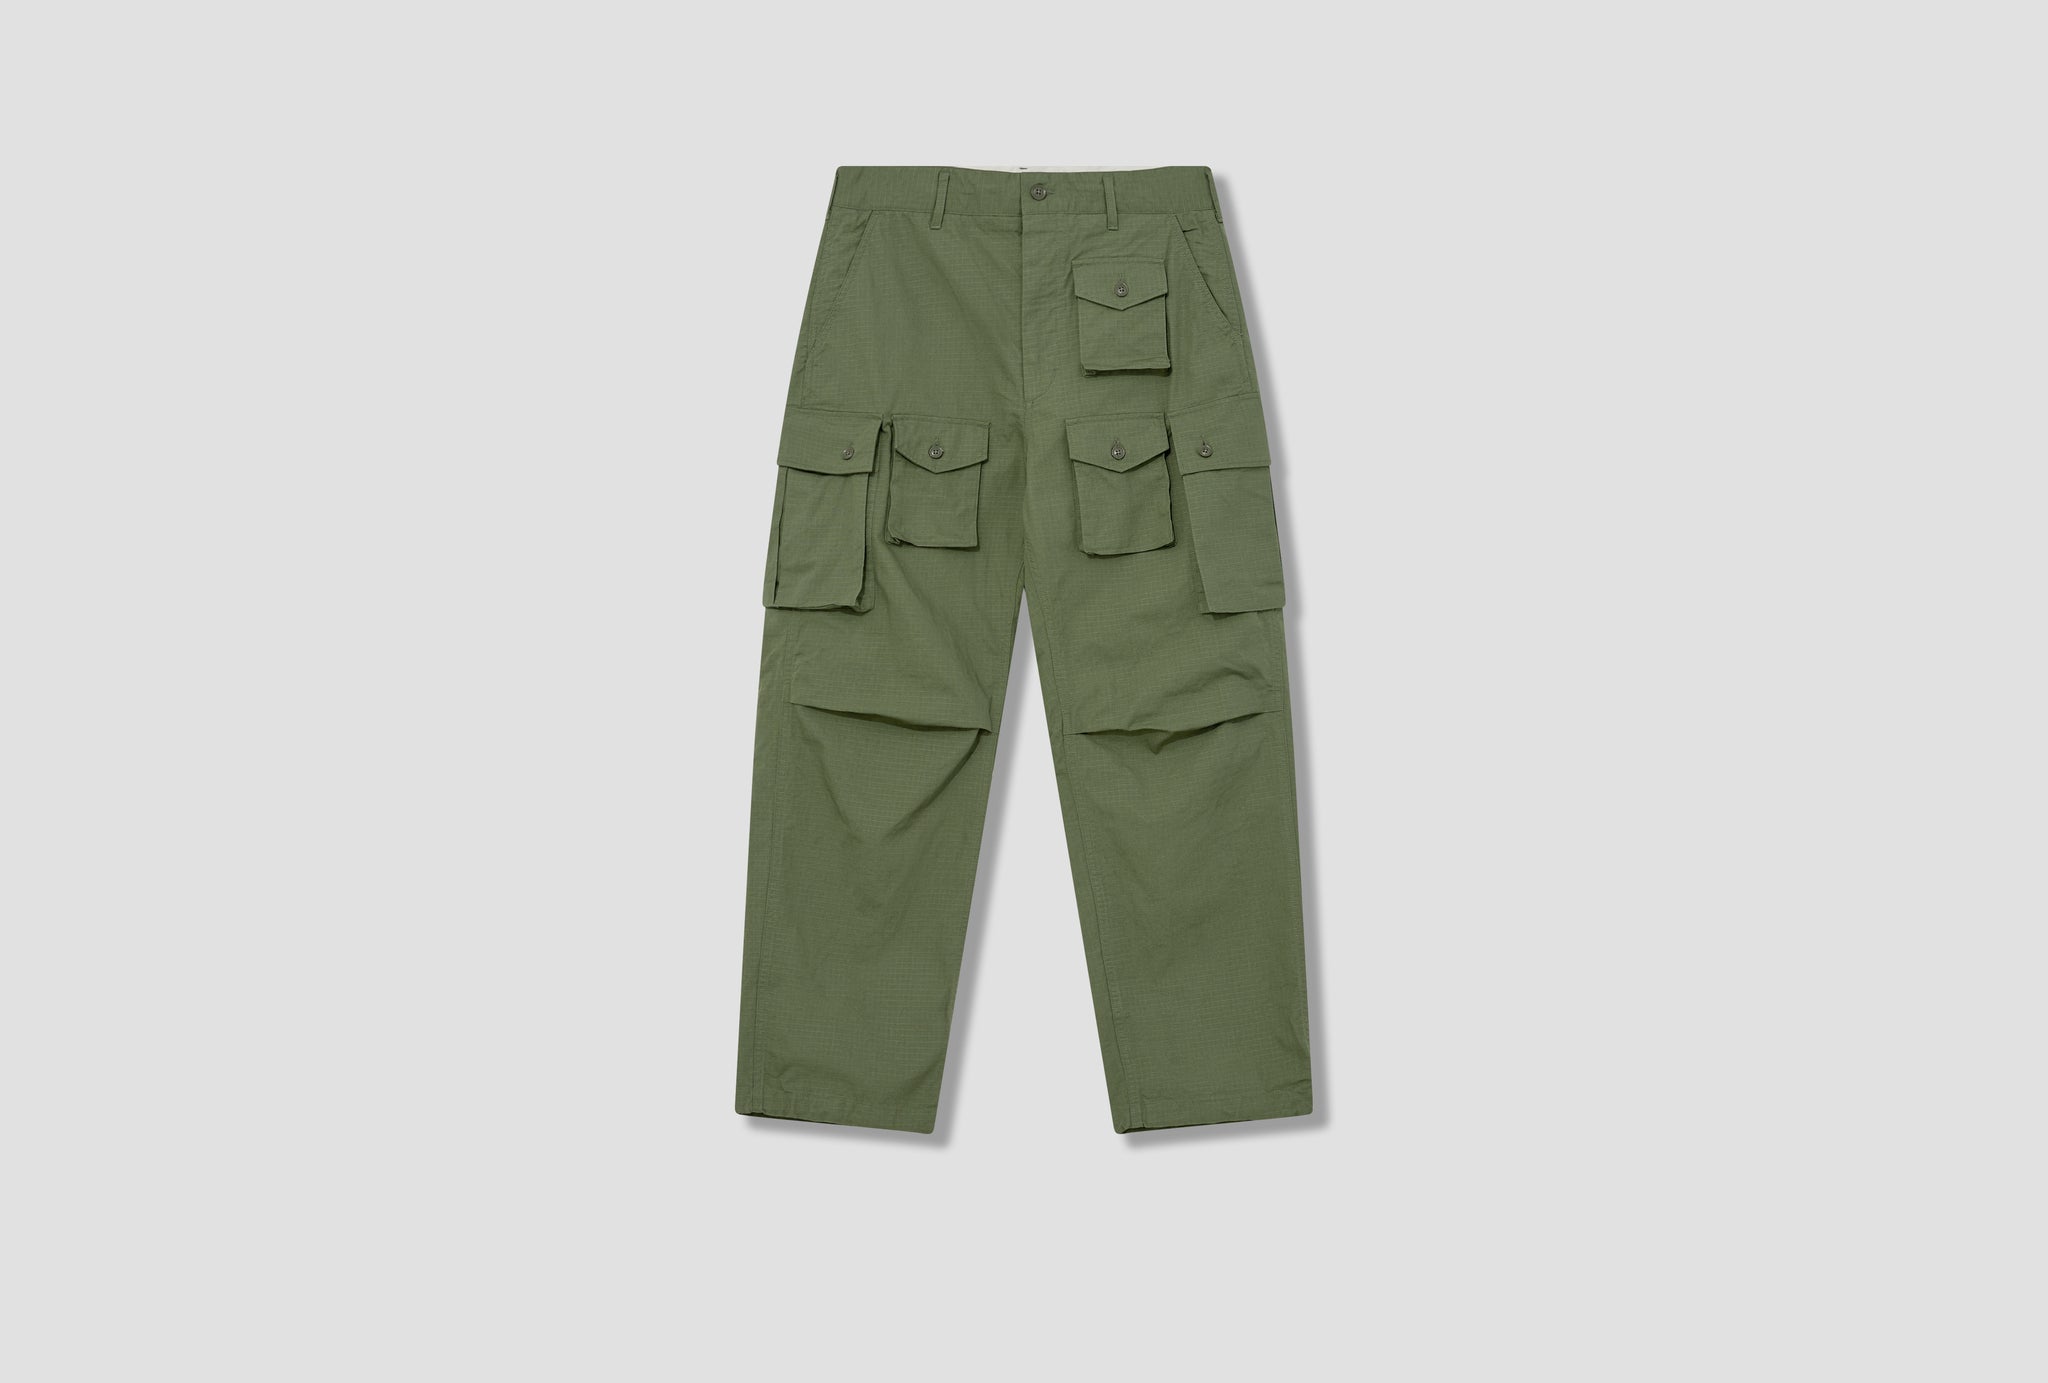 FA PANT - OLIVE COTTON RIPSTOP 23S1F016